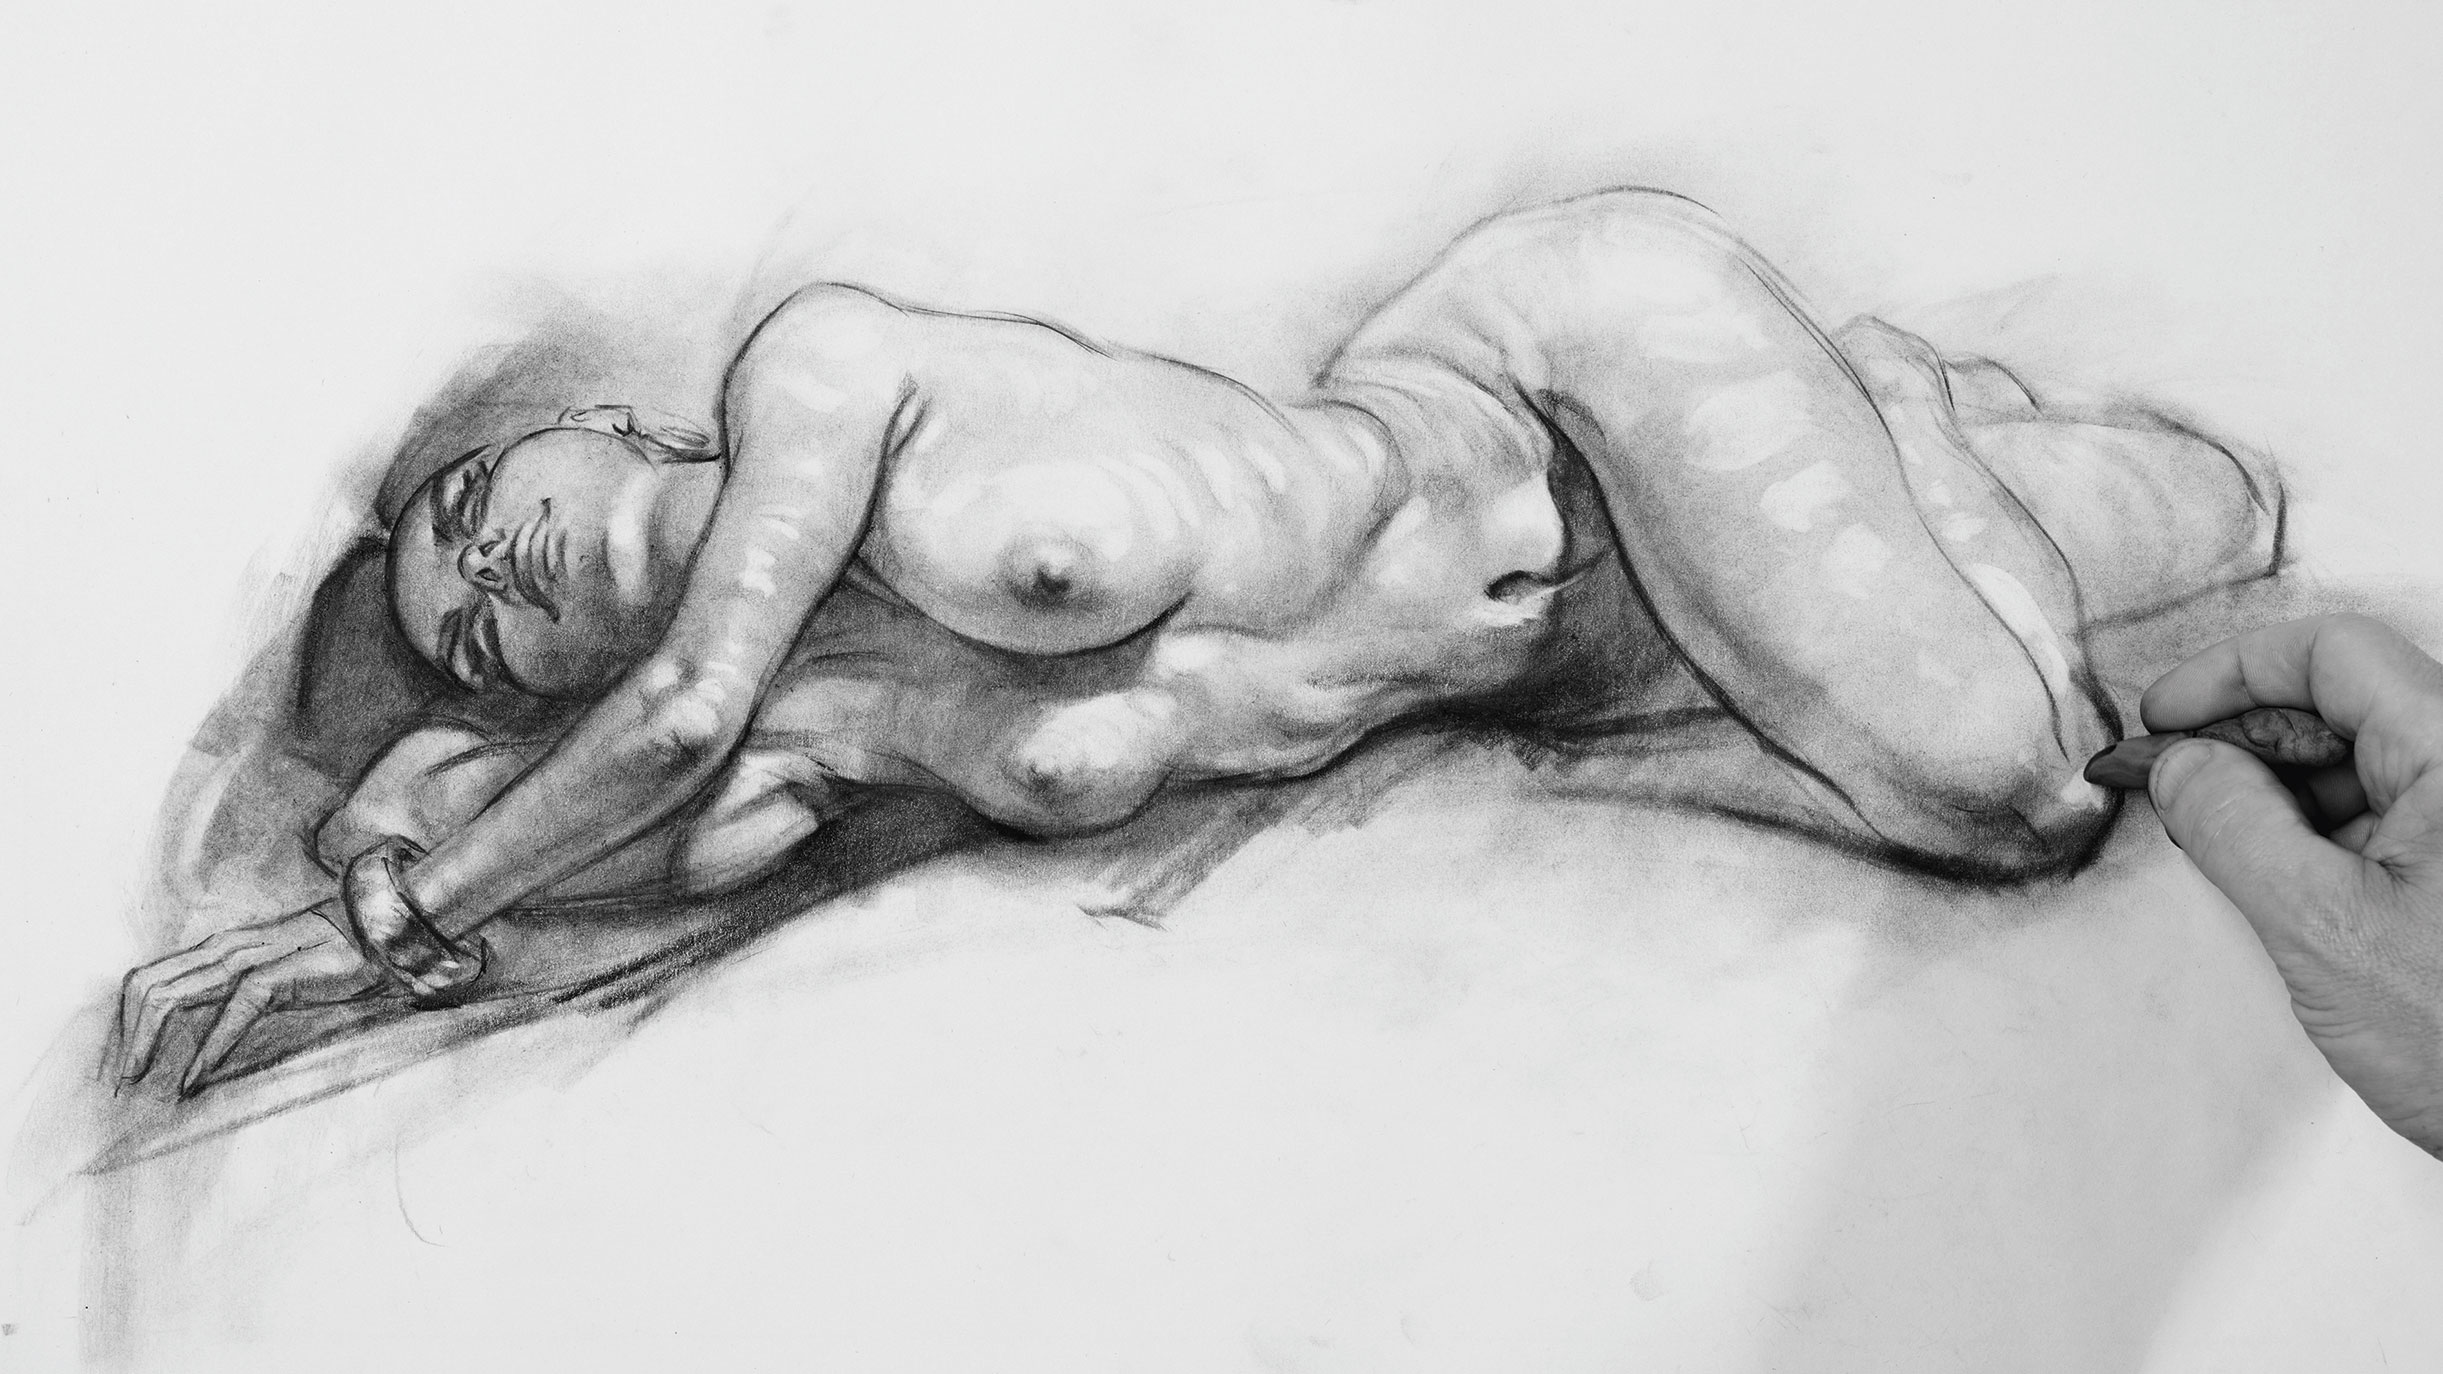 Charcoal figure with highlights added